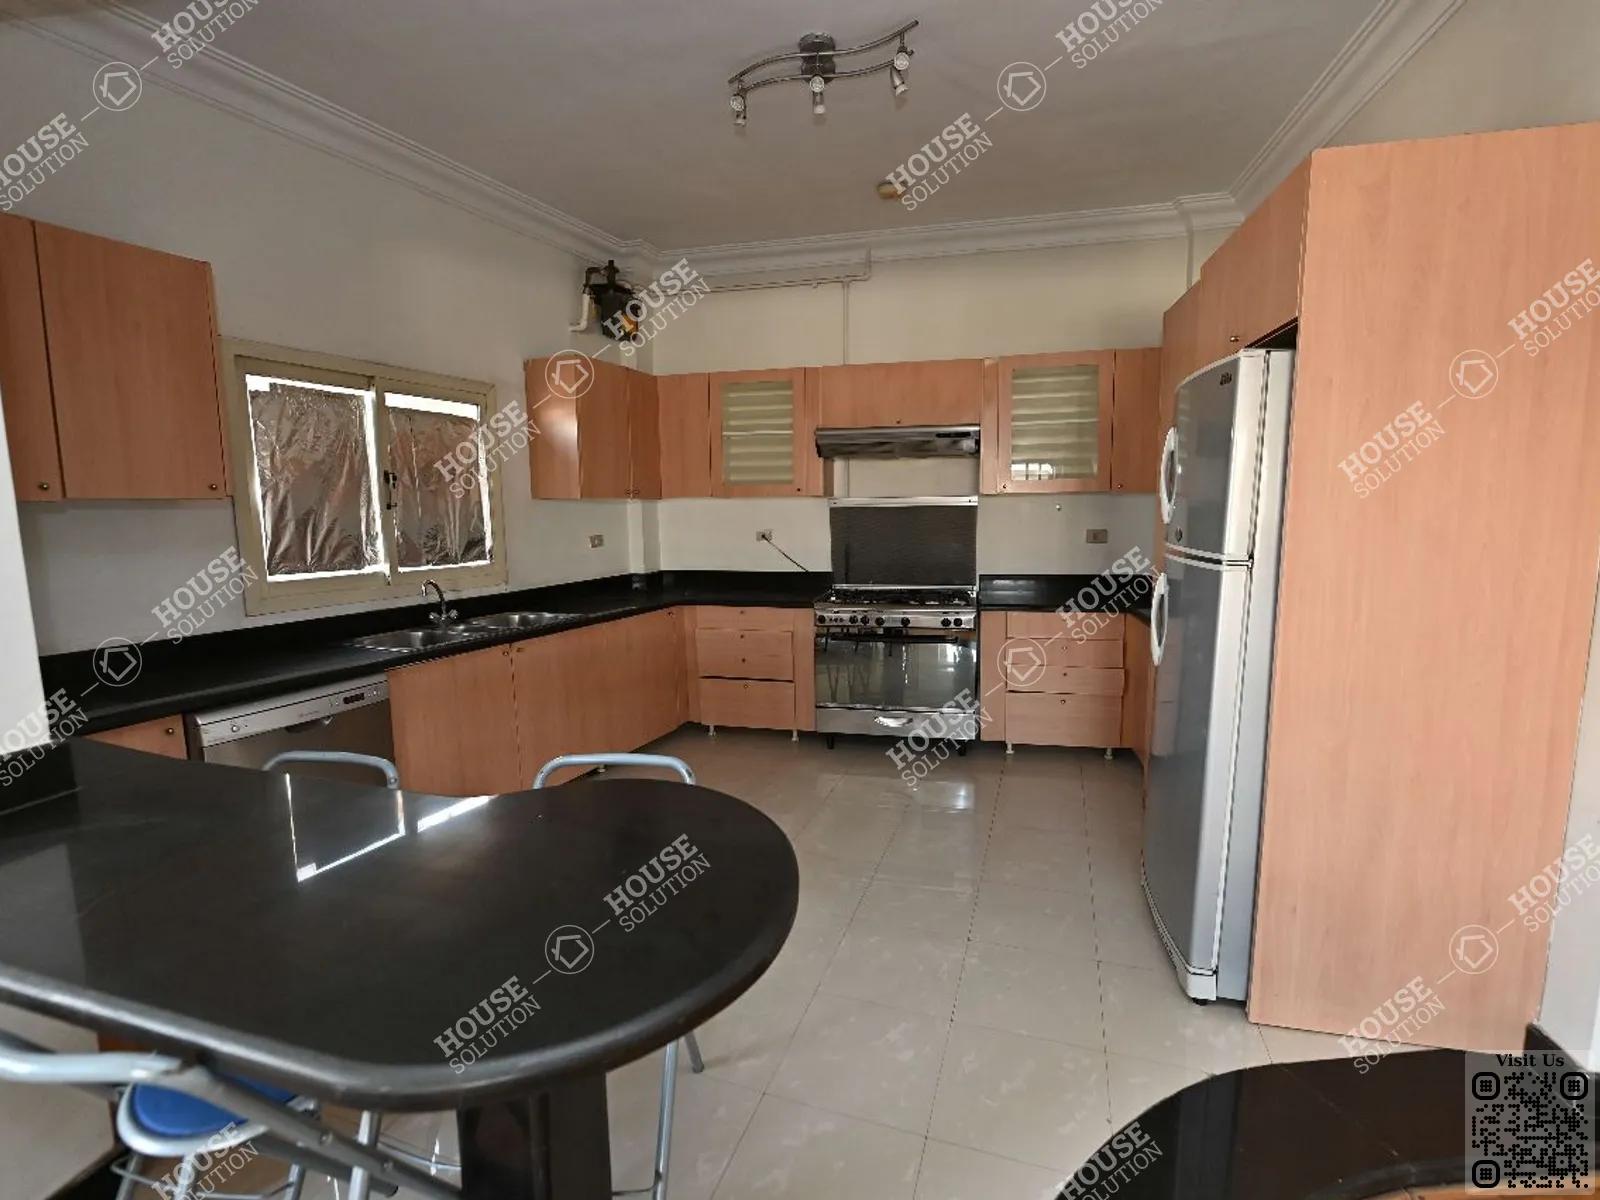 KITCHEN  @ Apartments For Rent In Maadi Maadi Degla Area: 120 m² consists of 3 Bedrooms 2 Bathrooms Modern furnished 5 stars #5619-1